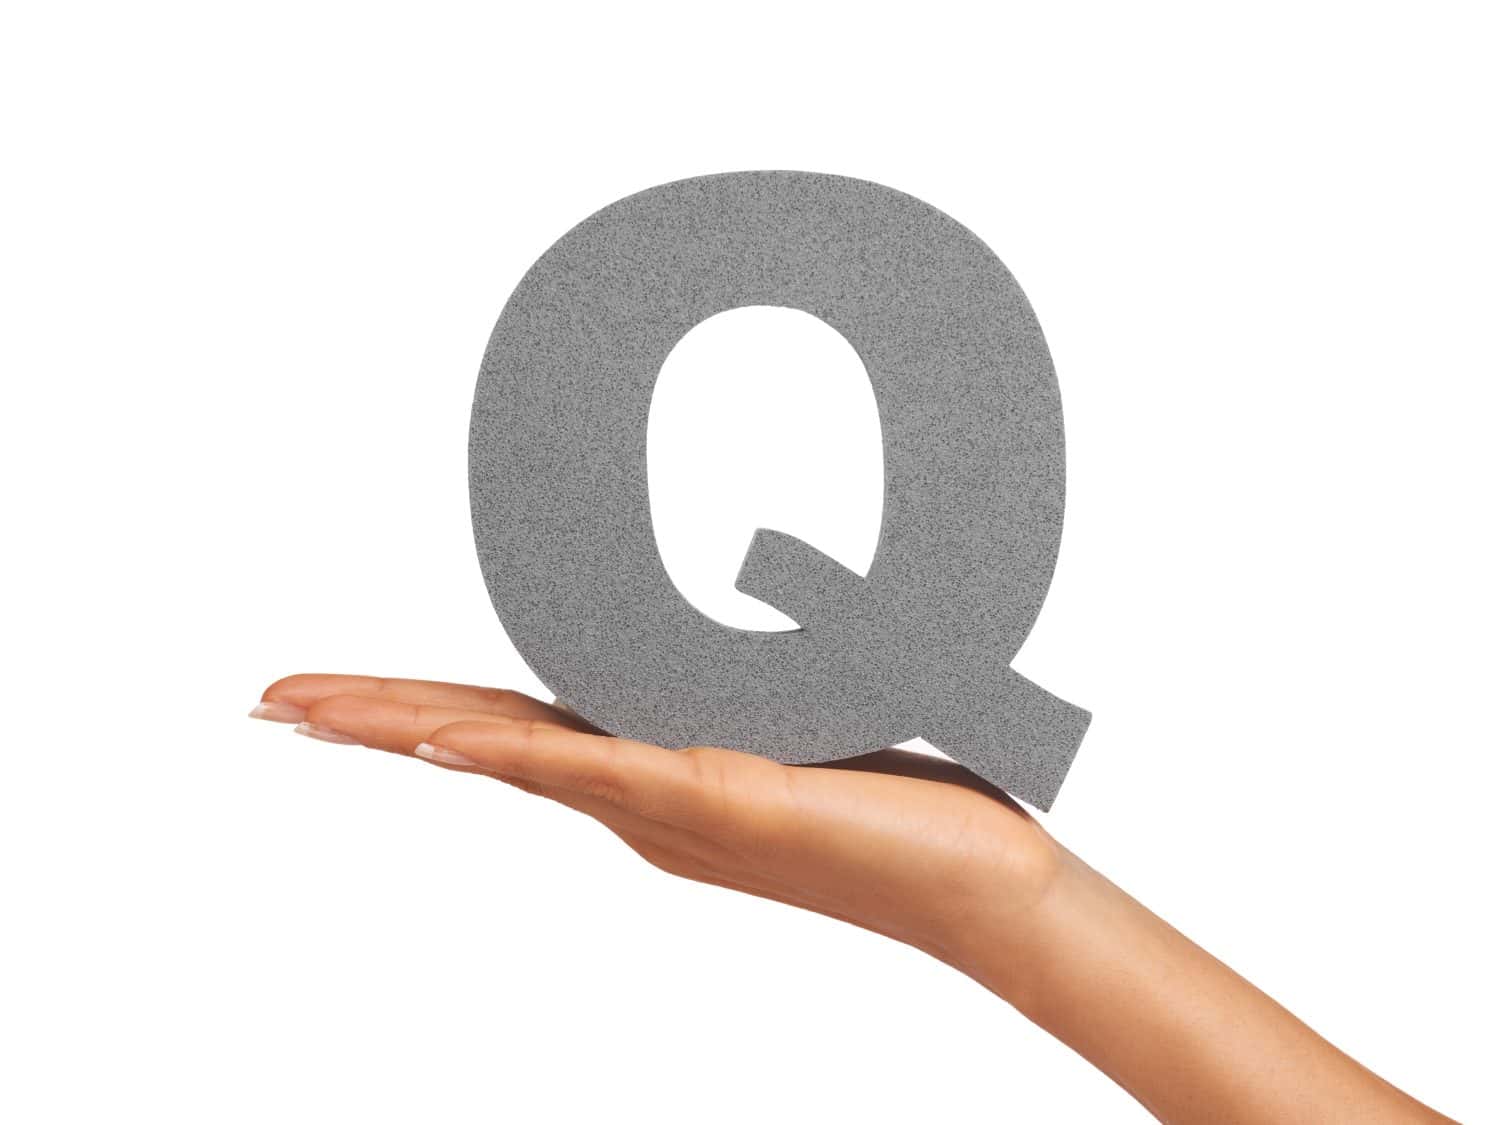 Woman, hand and letter Q or font in studio for advertising, learning or teaching presentation. Sign, alphabet or character for marketing, text or communication and grammar symbol on white background